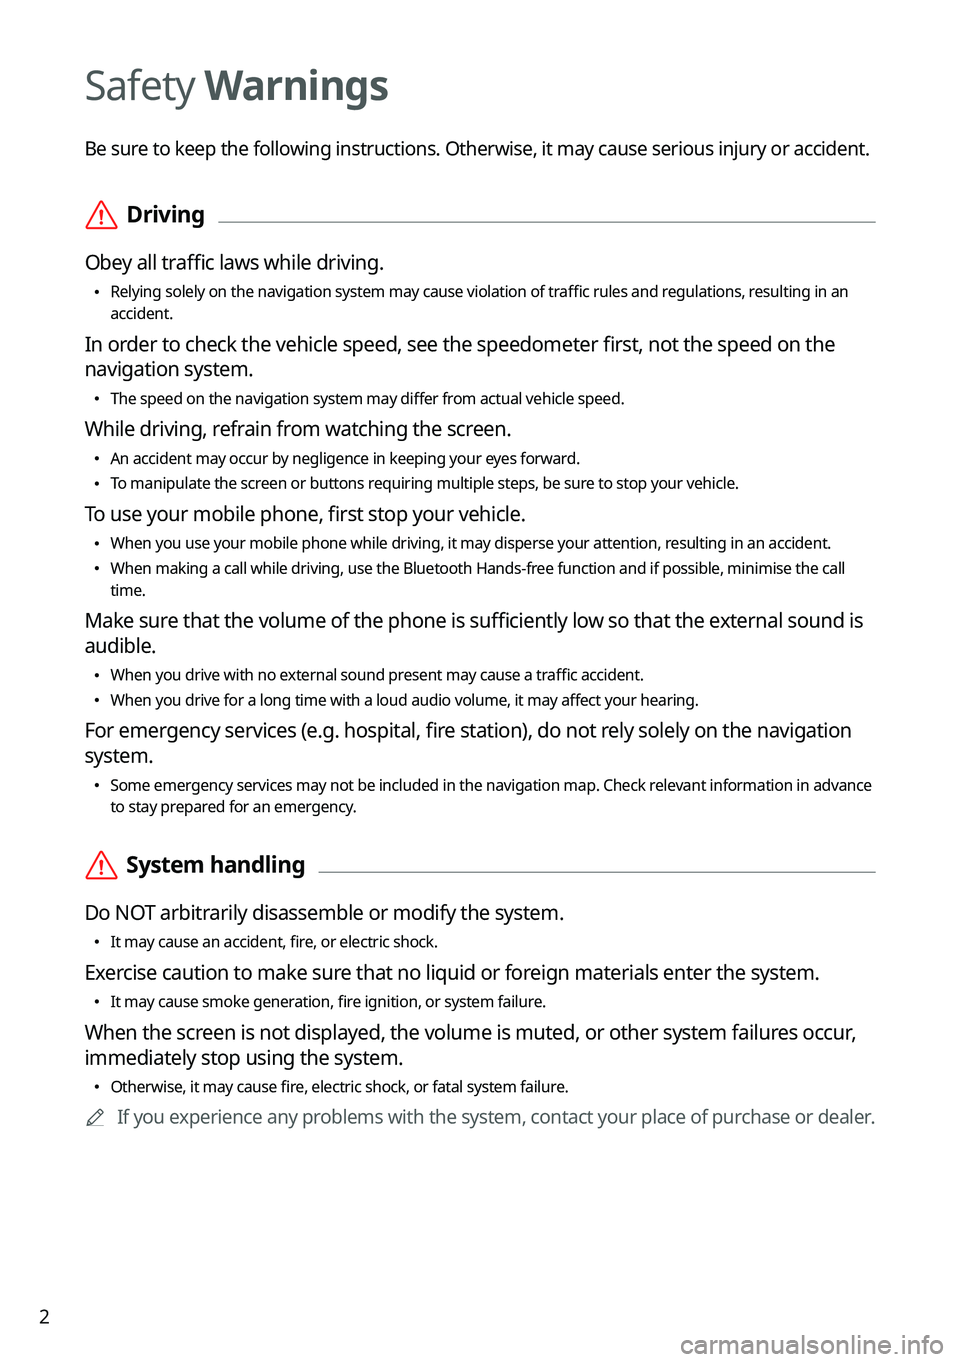 KIA FORTE 2023  Navigation System Quick Reference Guide 2
Safety Warnings
Be sure to keep the following instructions. Otherwise, it may cause serious injury or accident.
 ÝDriving
Obey all traffic laws while driving.
 •
Relying solely on the navigation 